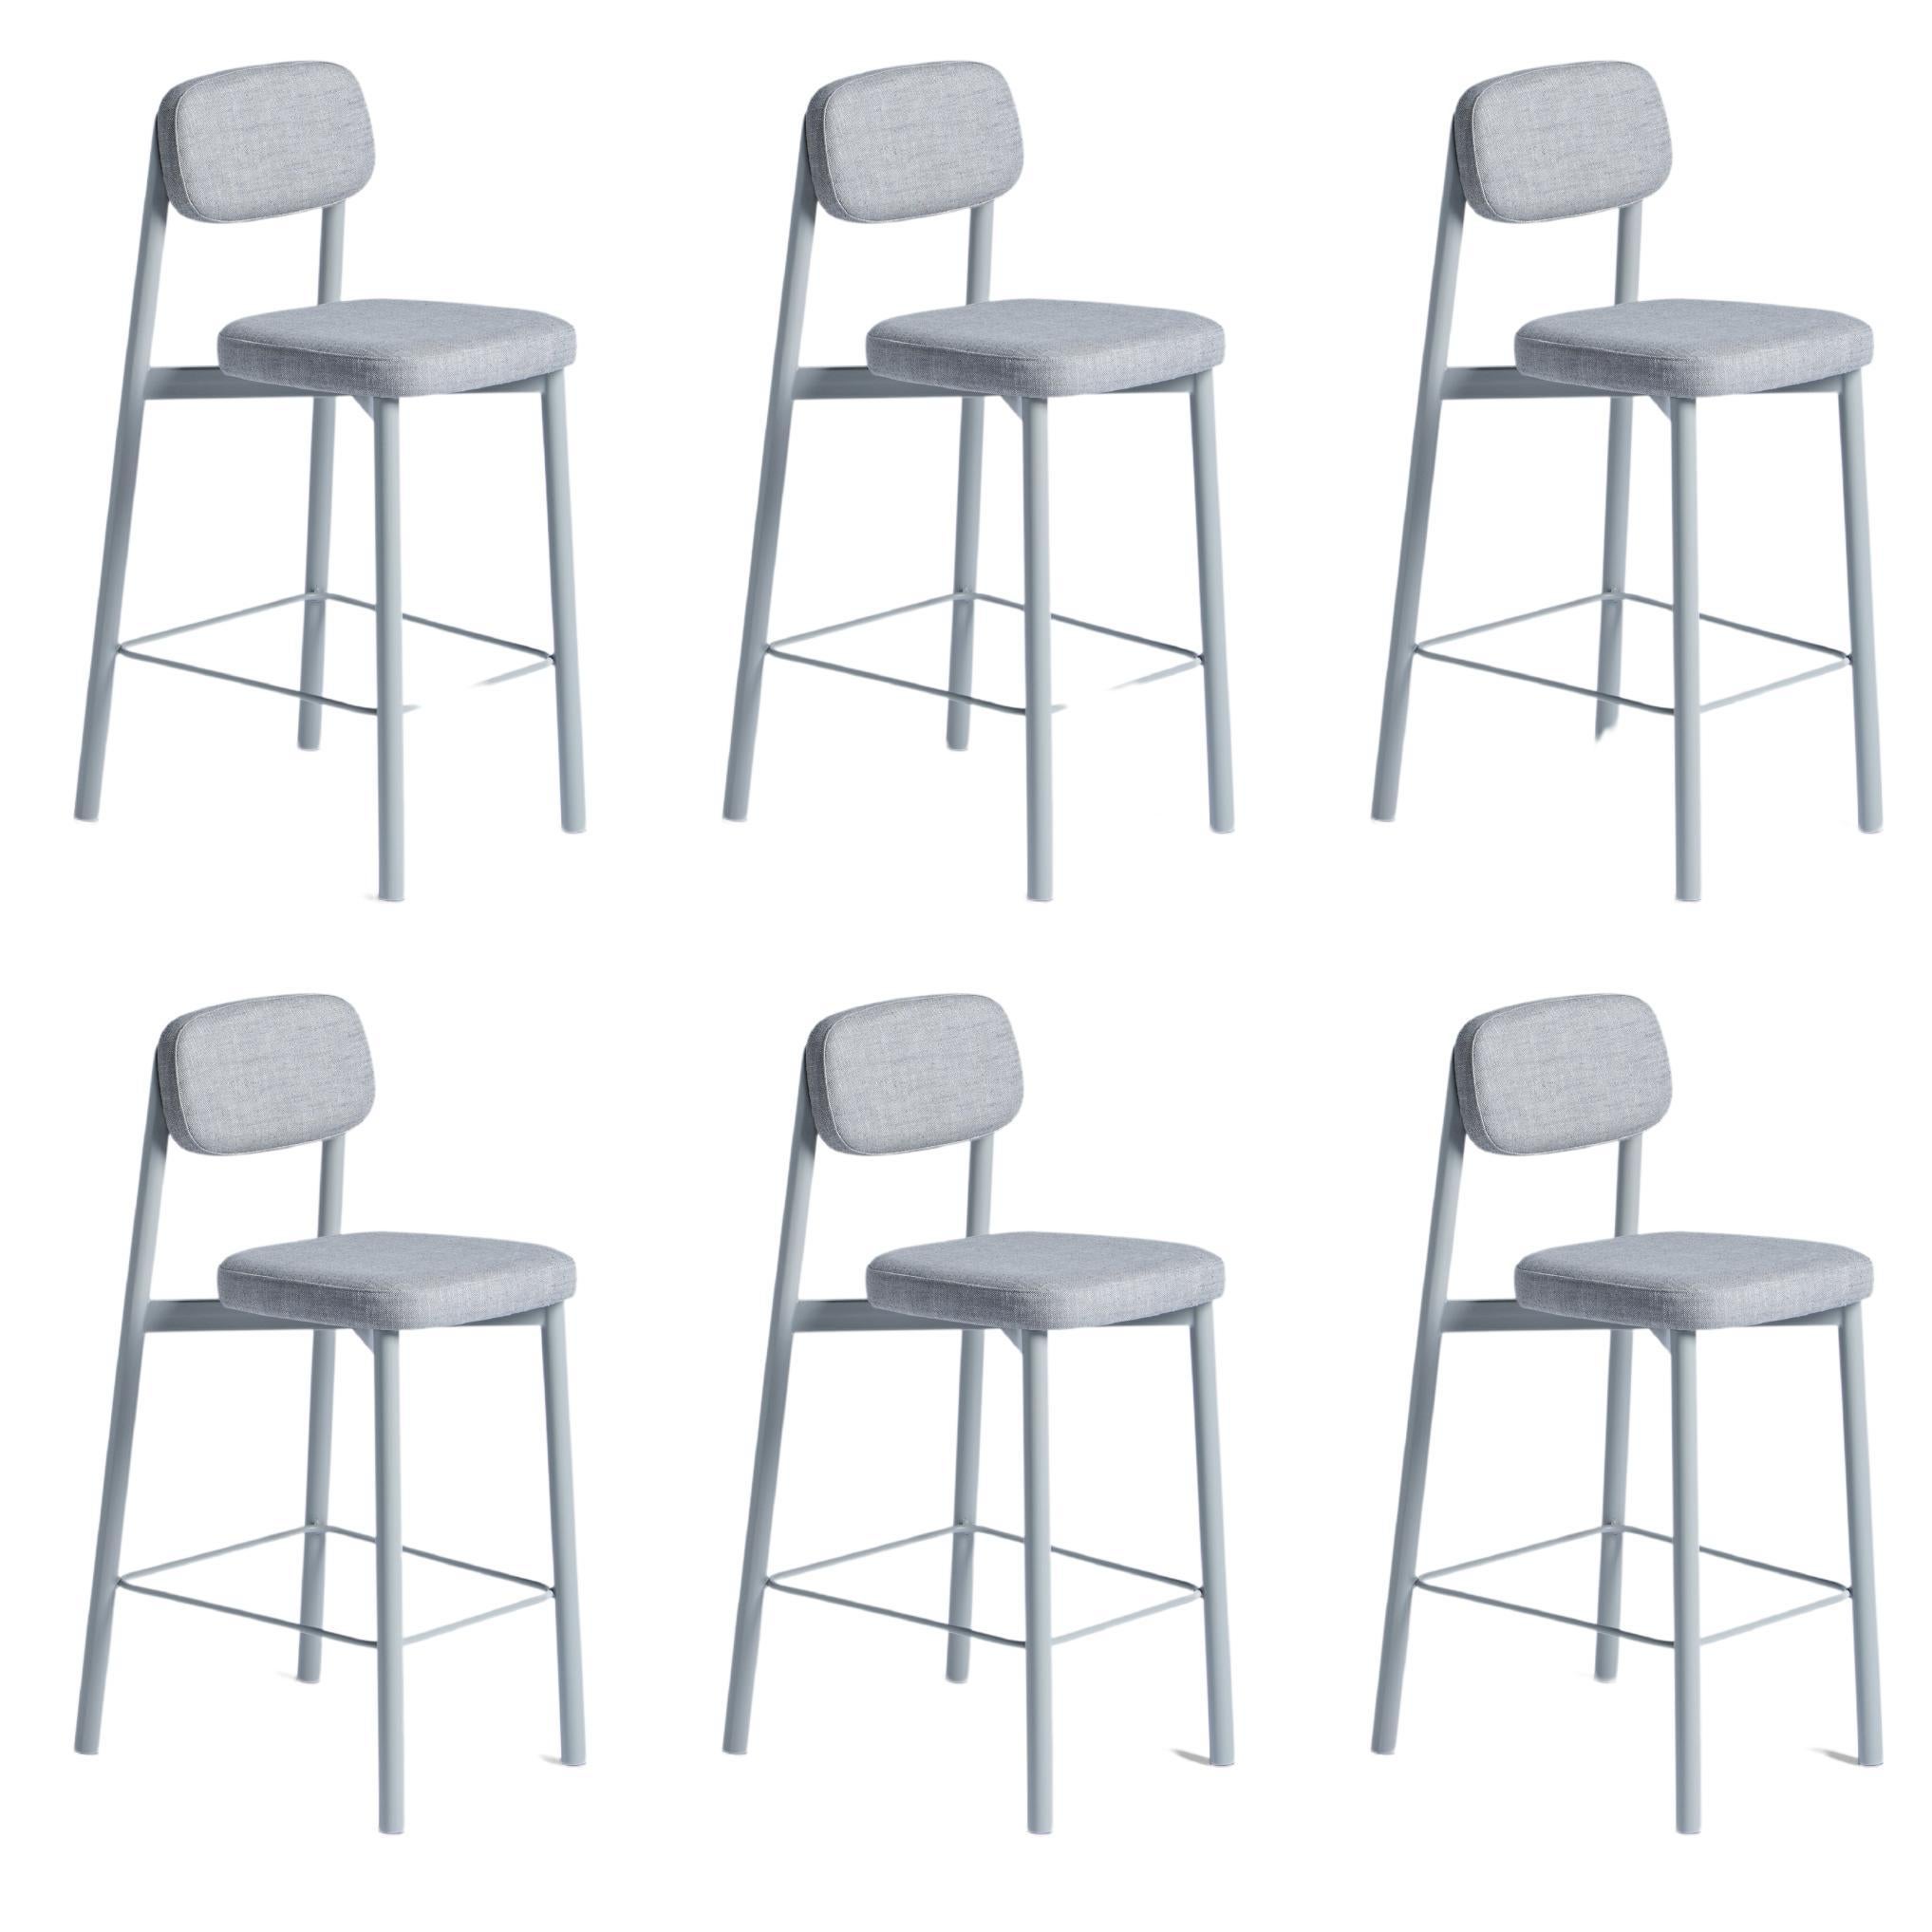 Set of 6 Grey Residence 65 Counter Chairs by Kann Design